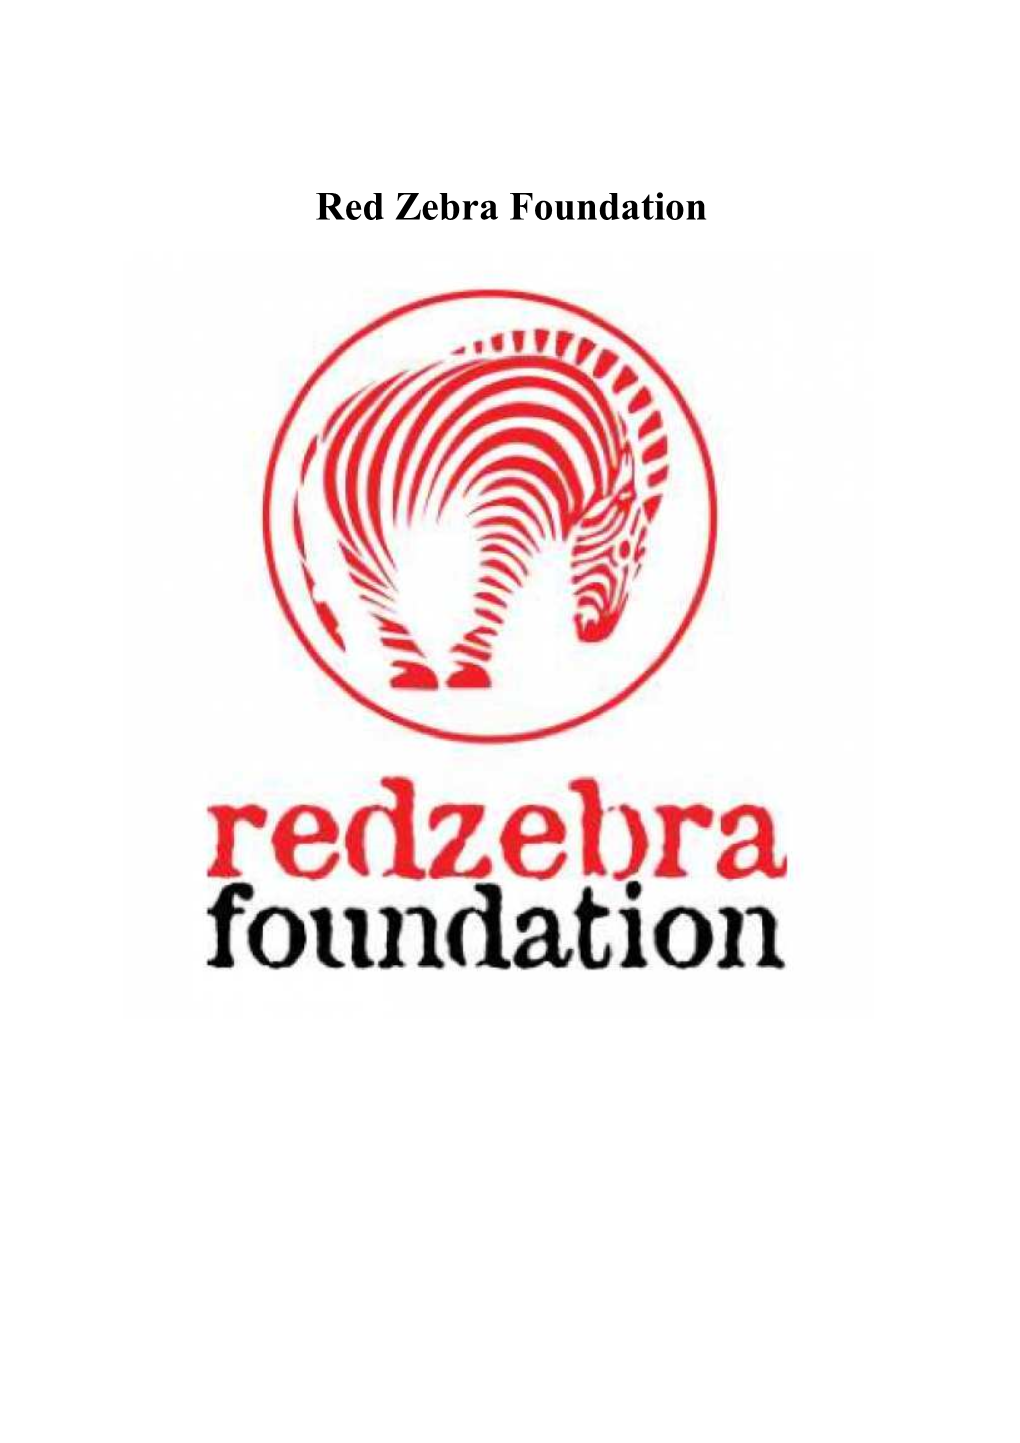 Brief on the Red Zebra Foundation